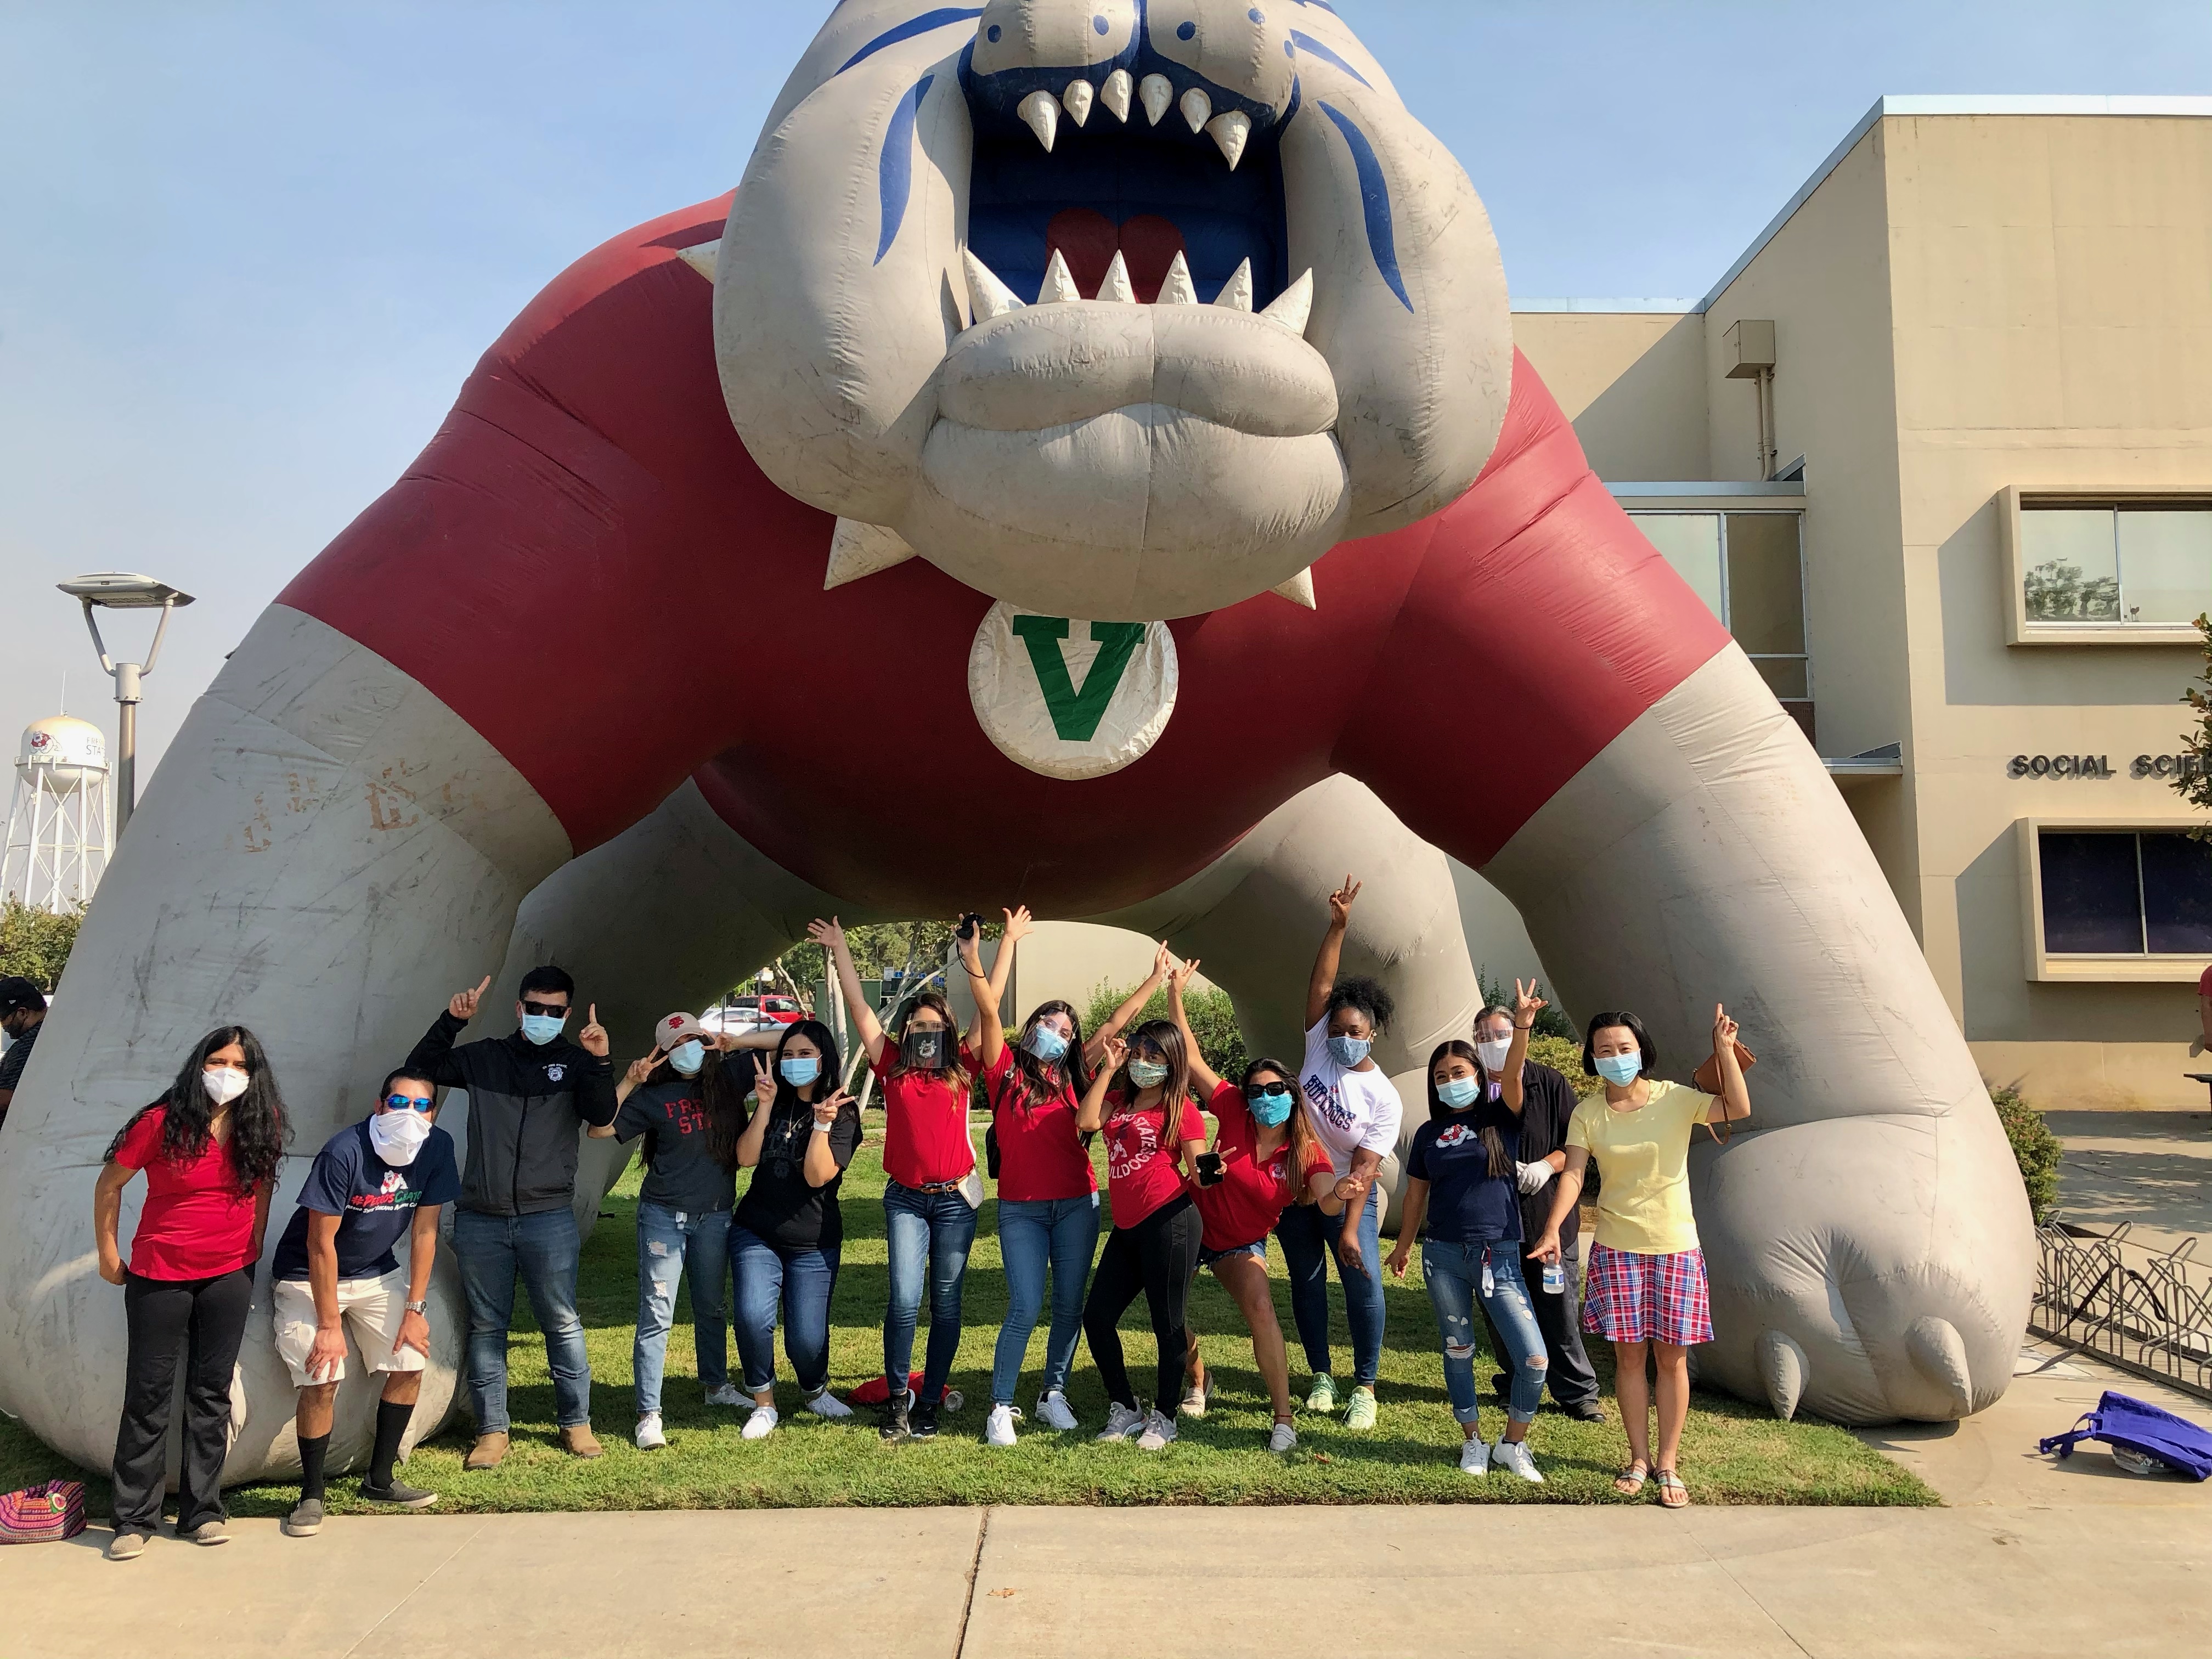 Student association members posing in front of inflatable bulldog mascot